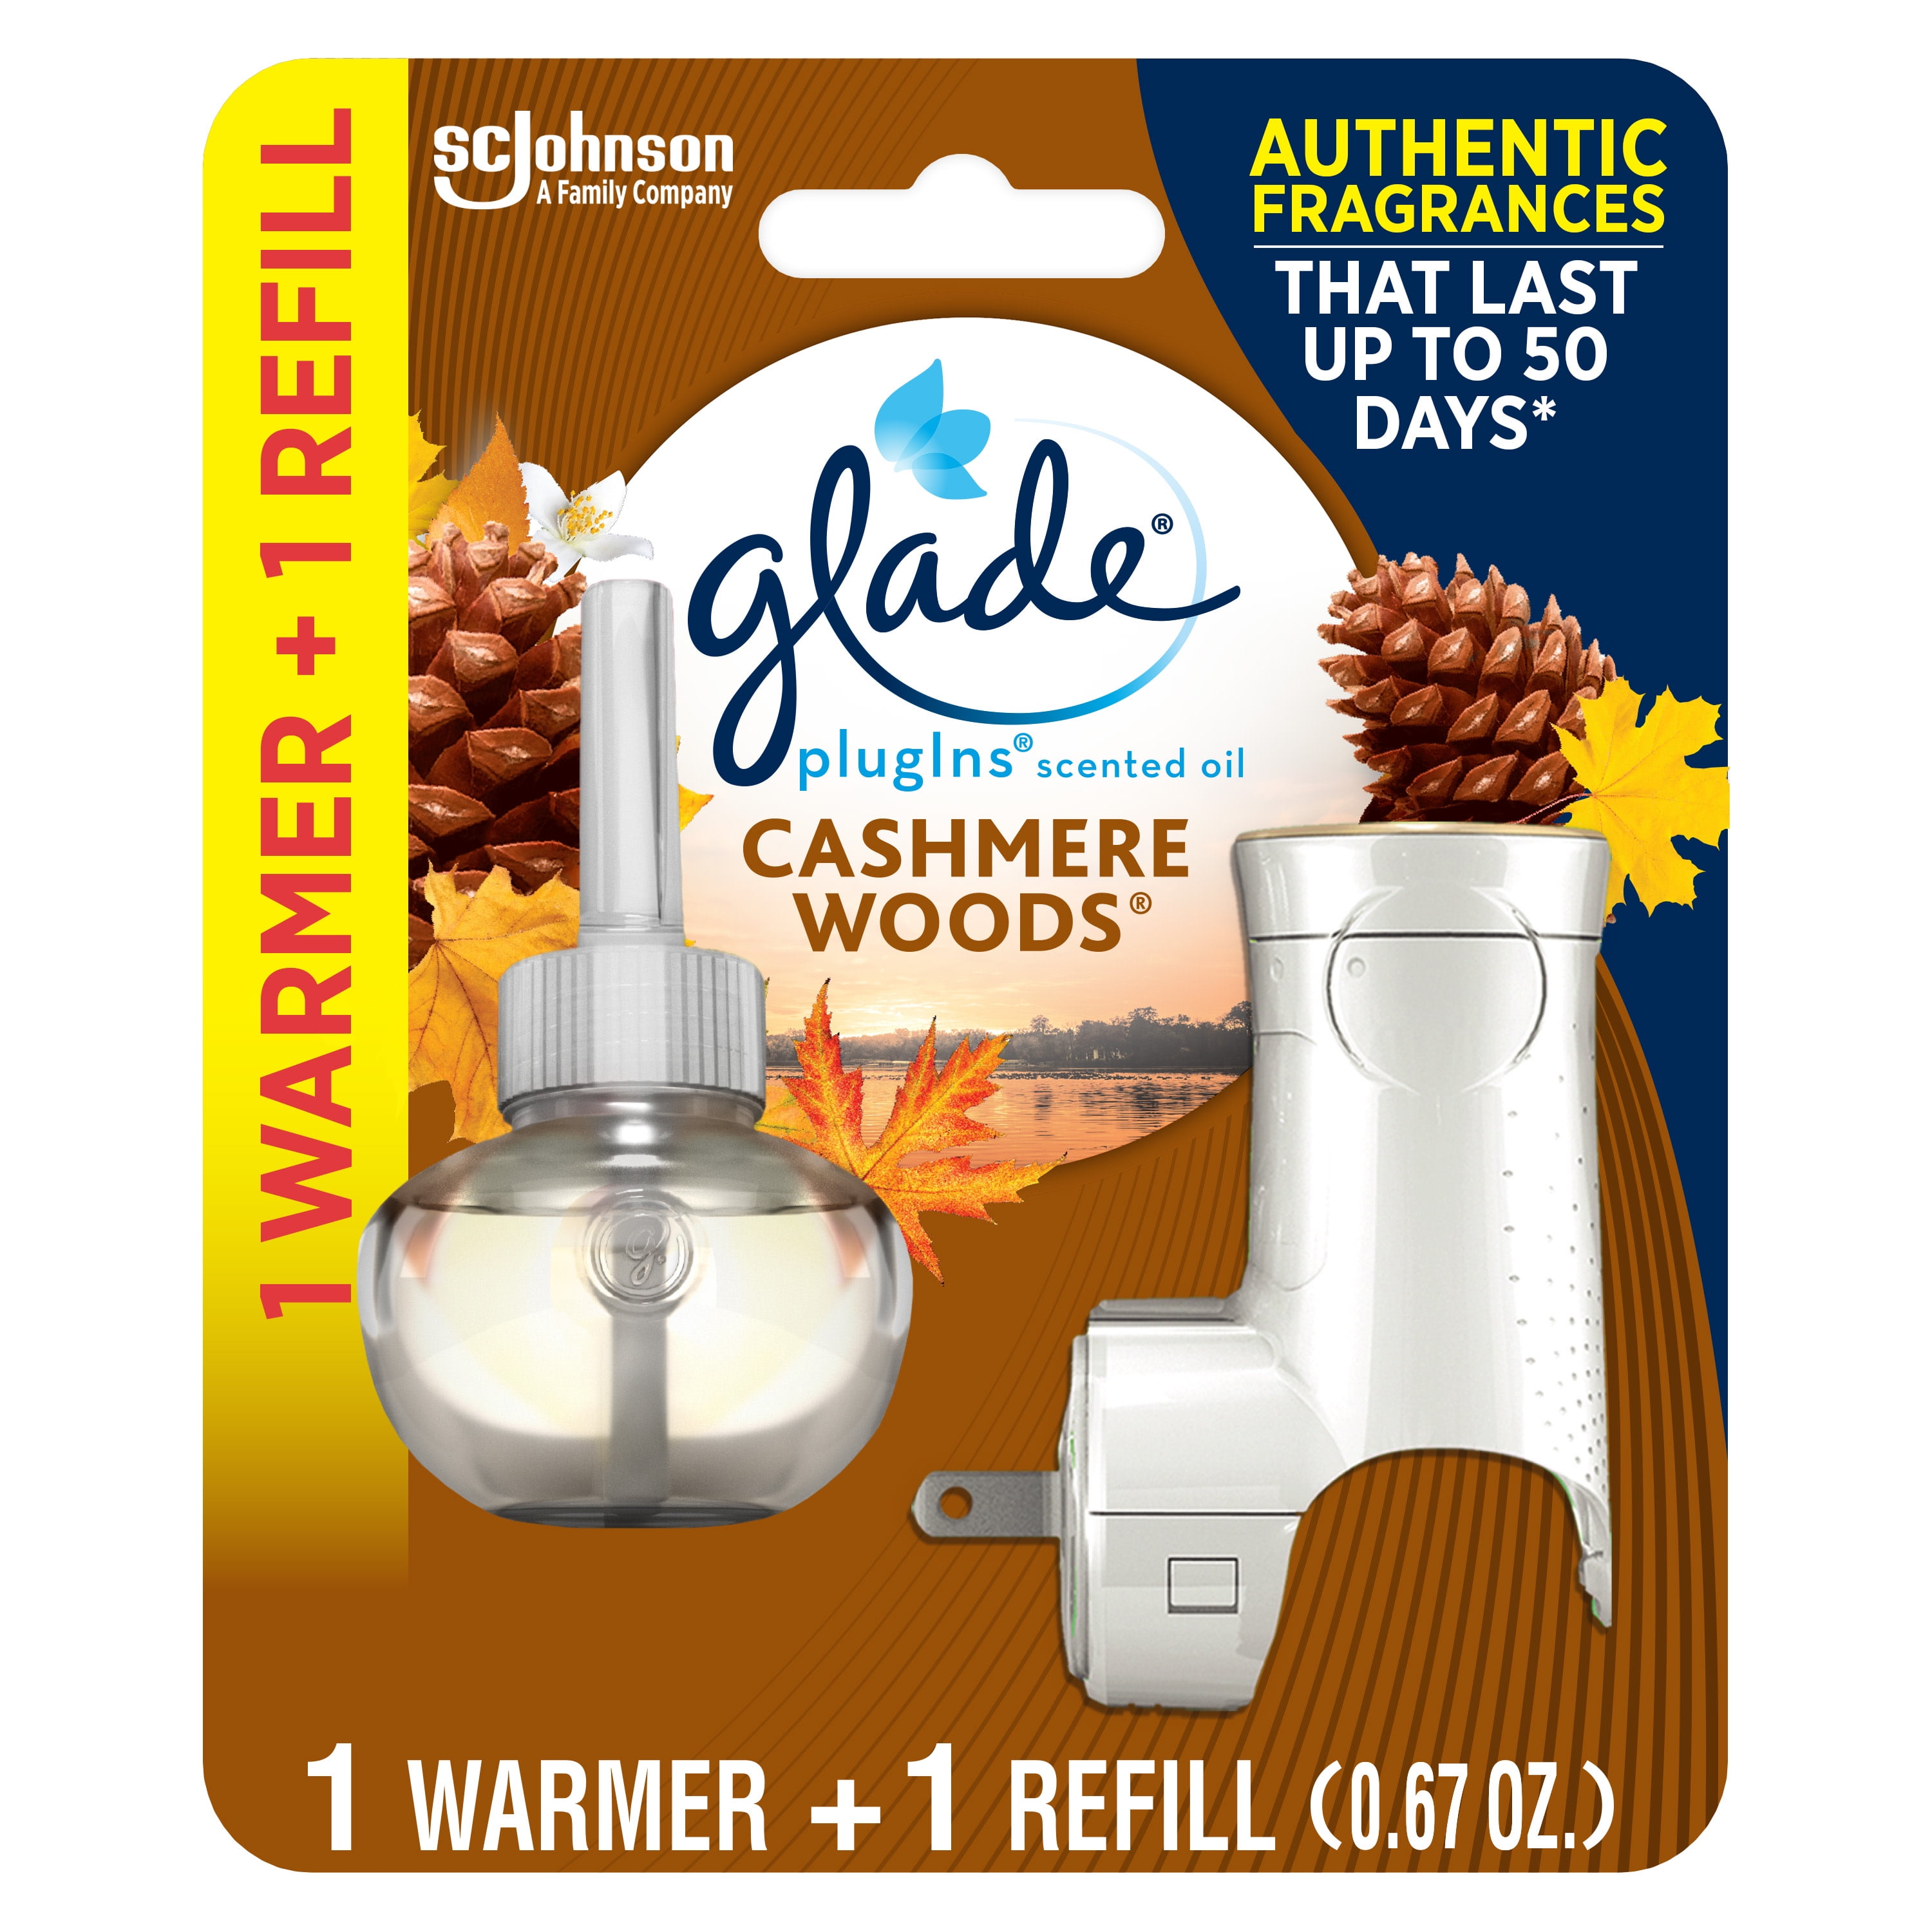 Glade PlugIns 1 Warmer + 1 CT Refill Starter Kit, Cashmere Woods, 0.67 FL. OZ. Total, Scented Oil Air Freshener Infused with Essential Oils